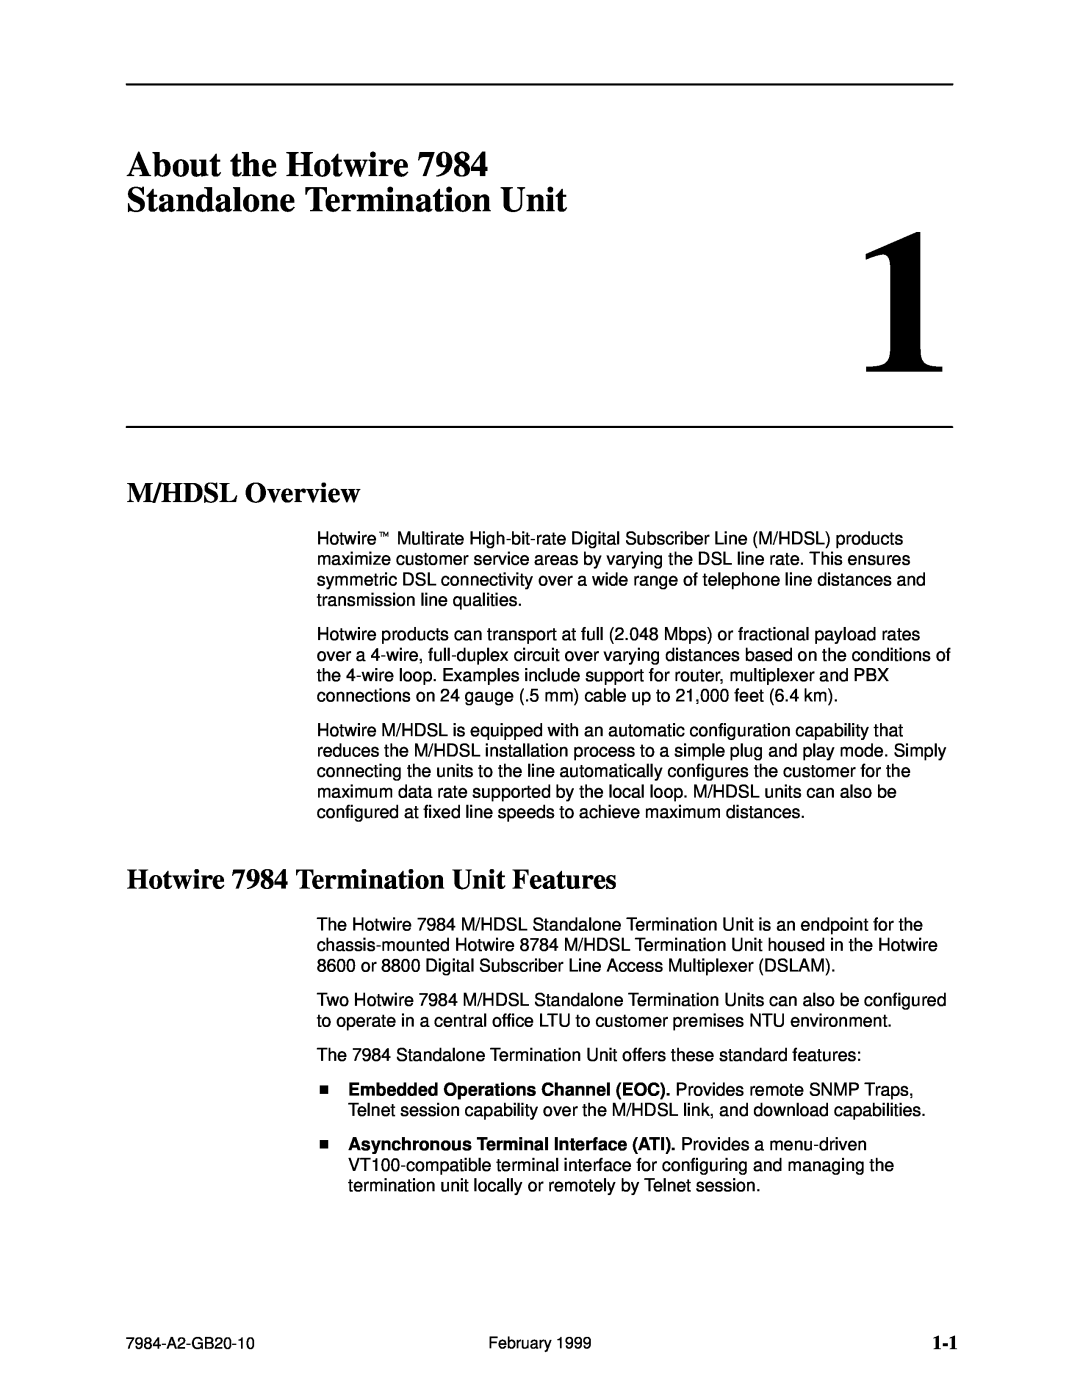 Paradyne Hotwire 7984 manual About the Hotwire Standalone Termination Unit, M/HDSL Overview 